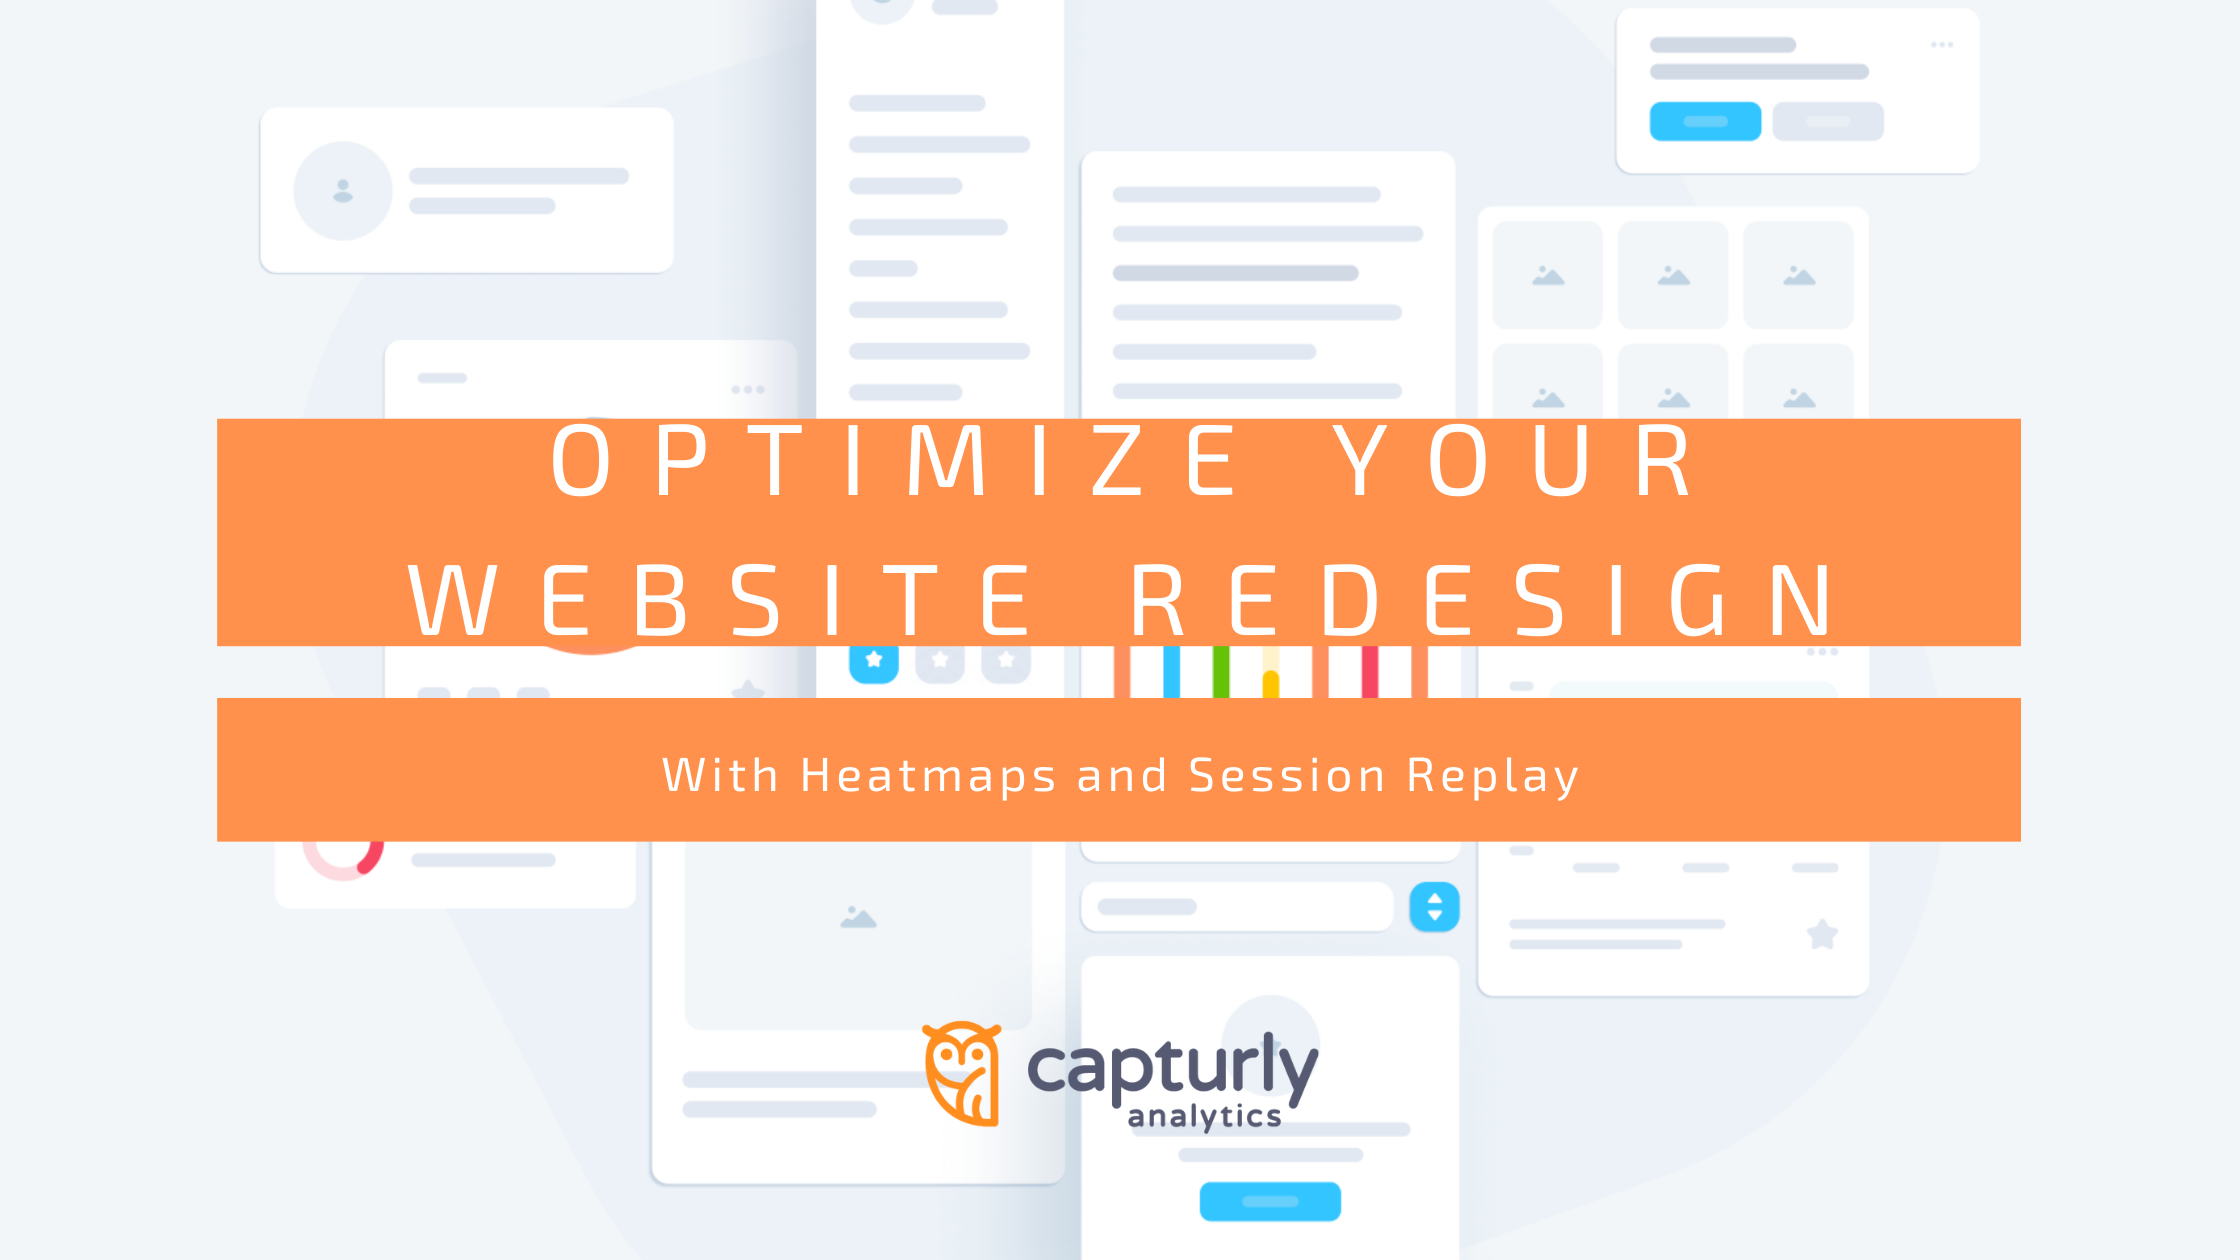 Optimize your website redesign with heatmaps and session replays